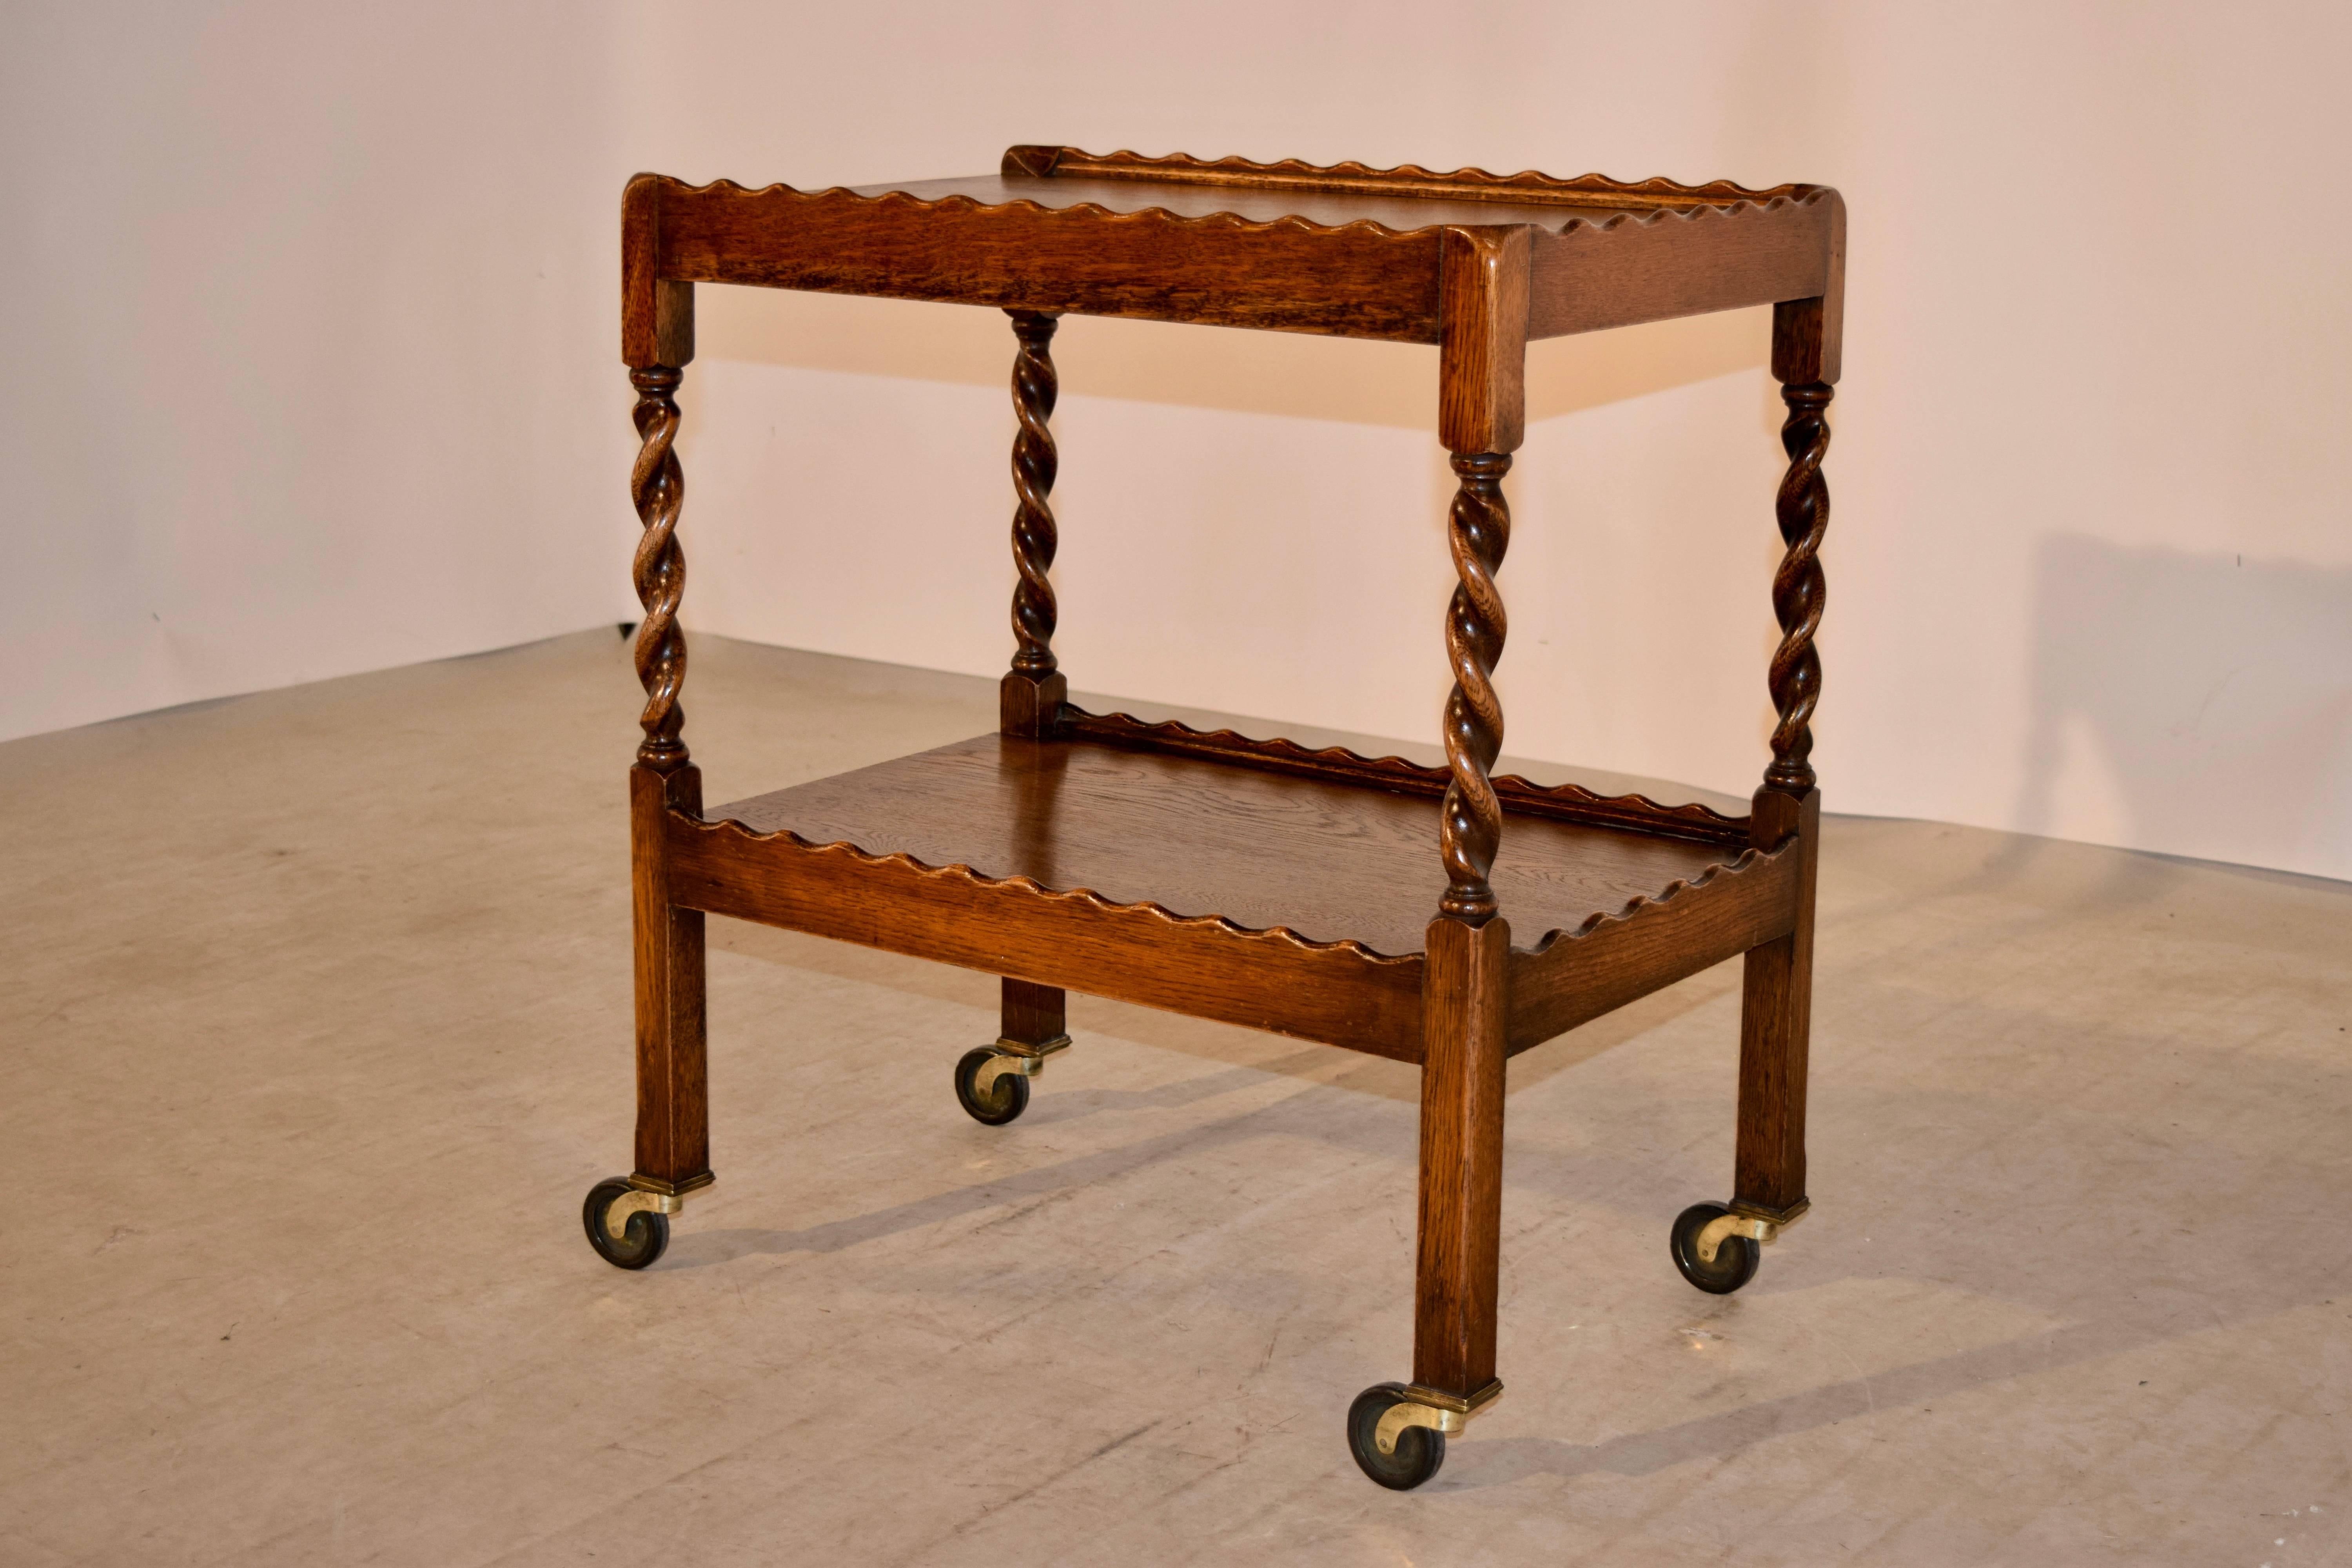 19th century English oak drinks cart with a wonderfully scalloped galleries on both shelves, separated by hand turned barley twist legs, which end in straight legs on original casters.